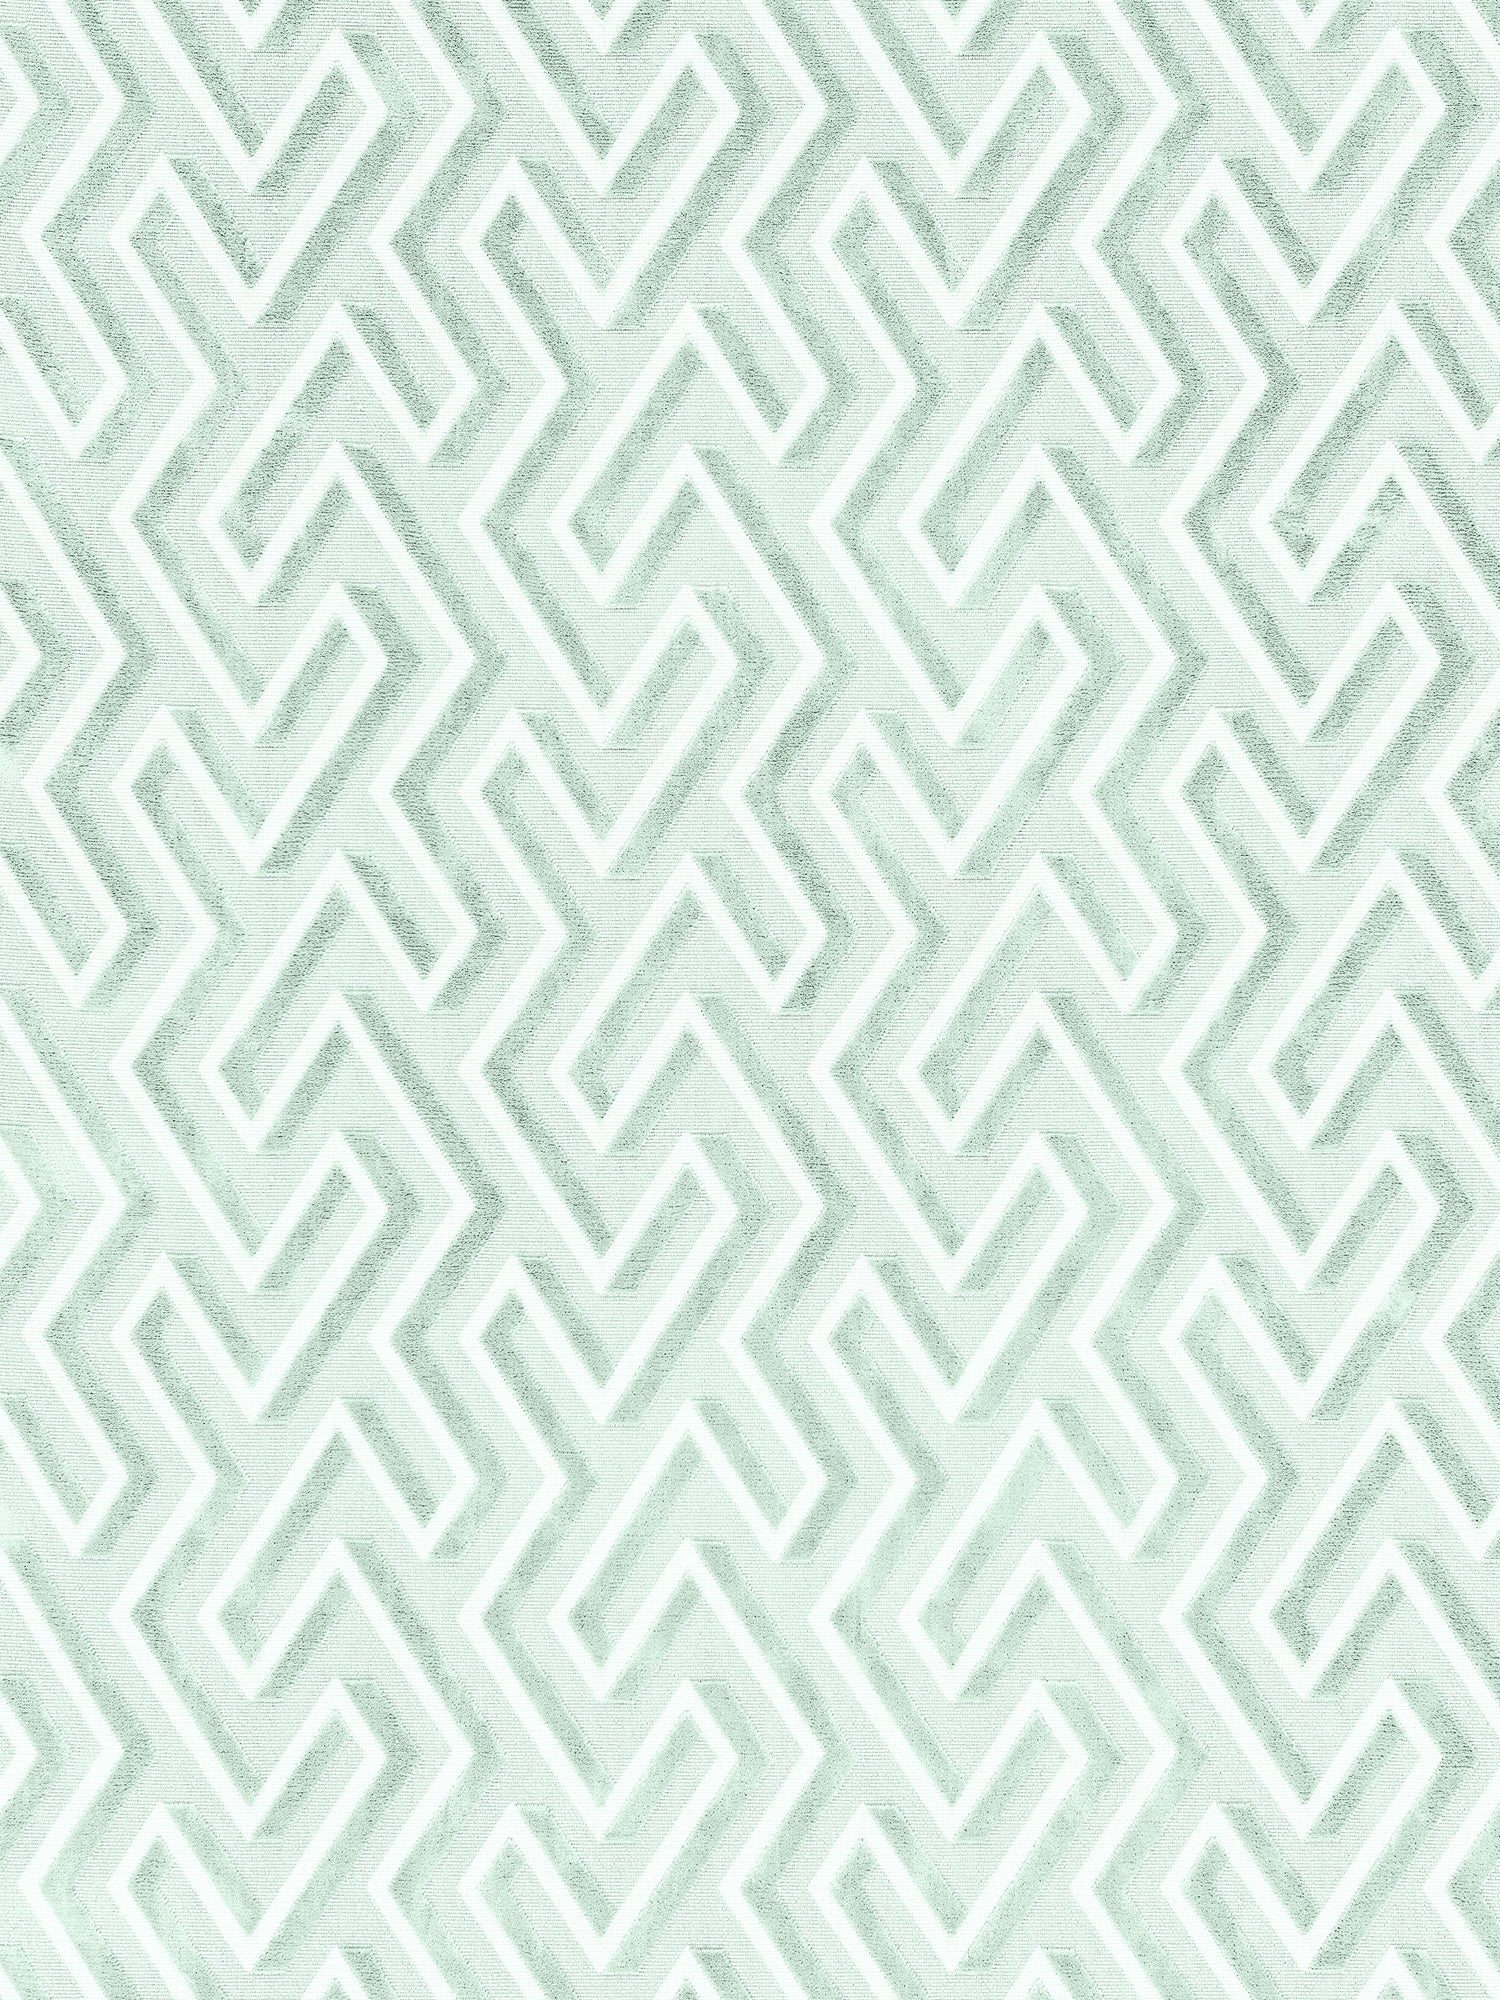 Maze Velvet fabric in harbor color - pattern number SC 000227237 - by Scalamandre in the Scalamandre Fabrics Book 1 collection